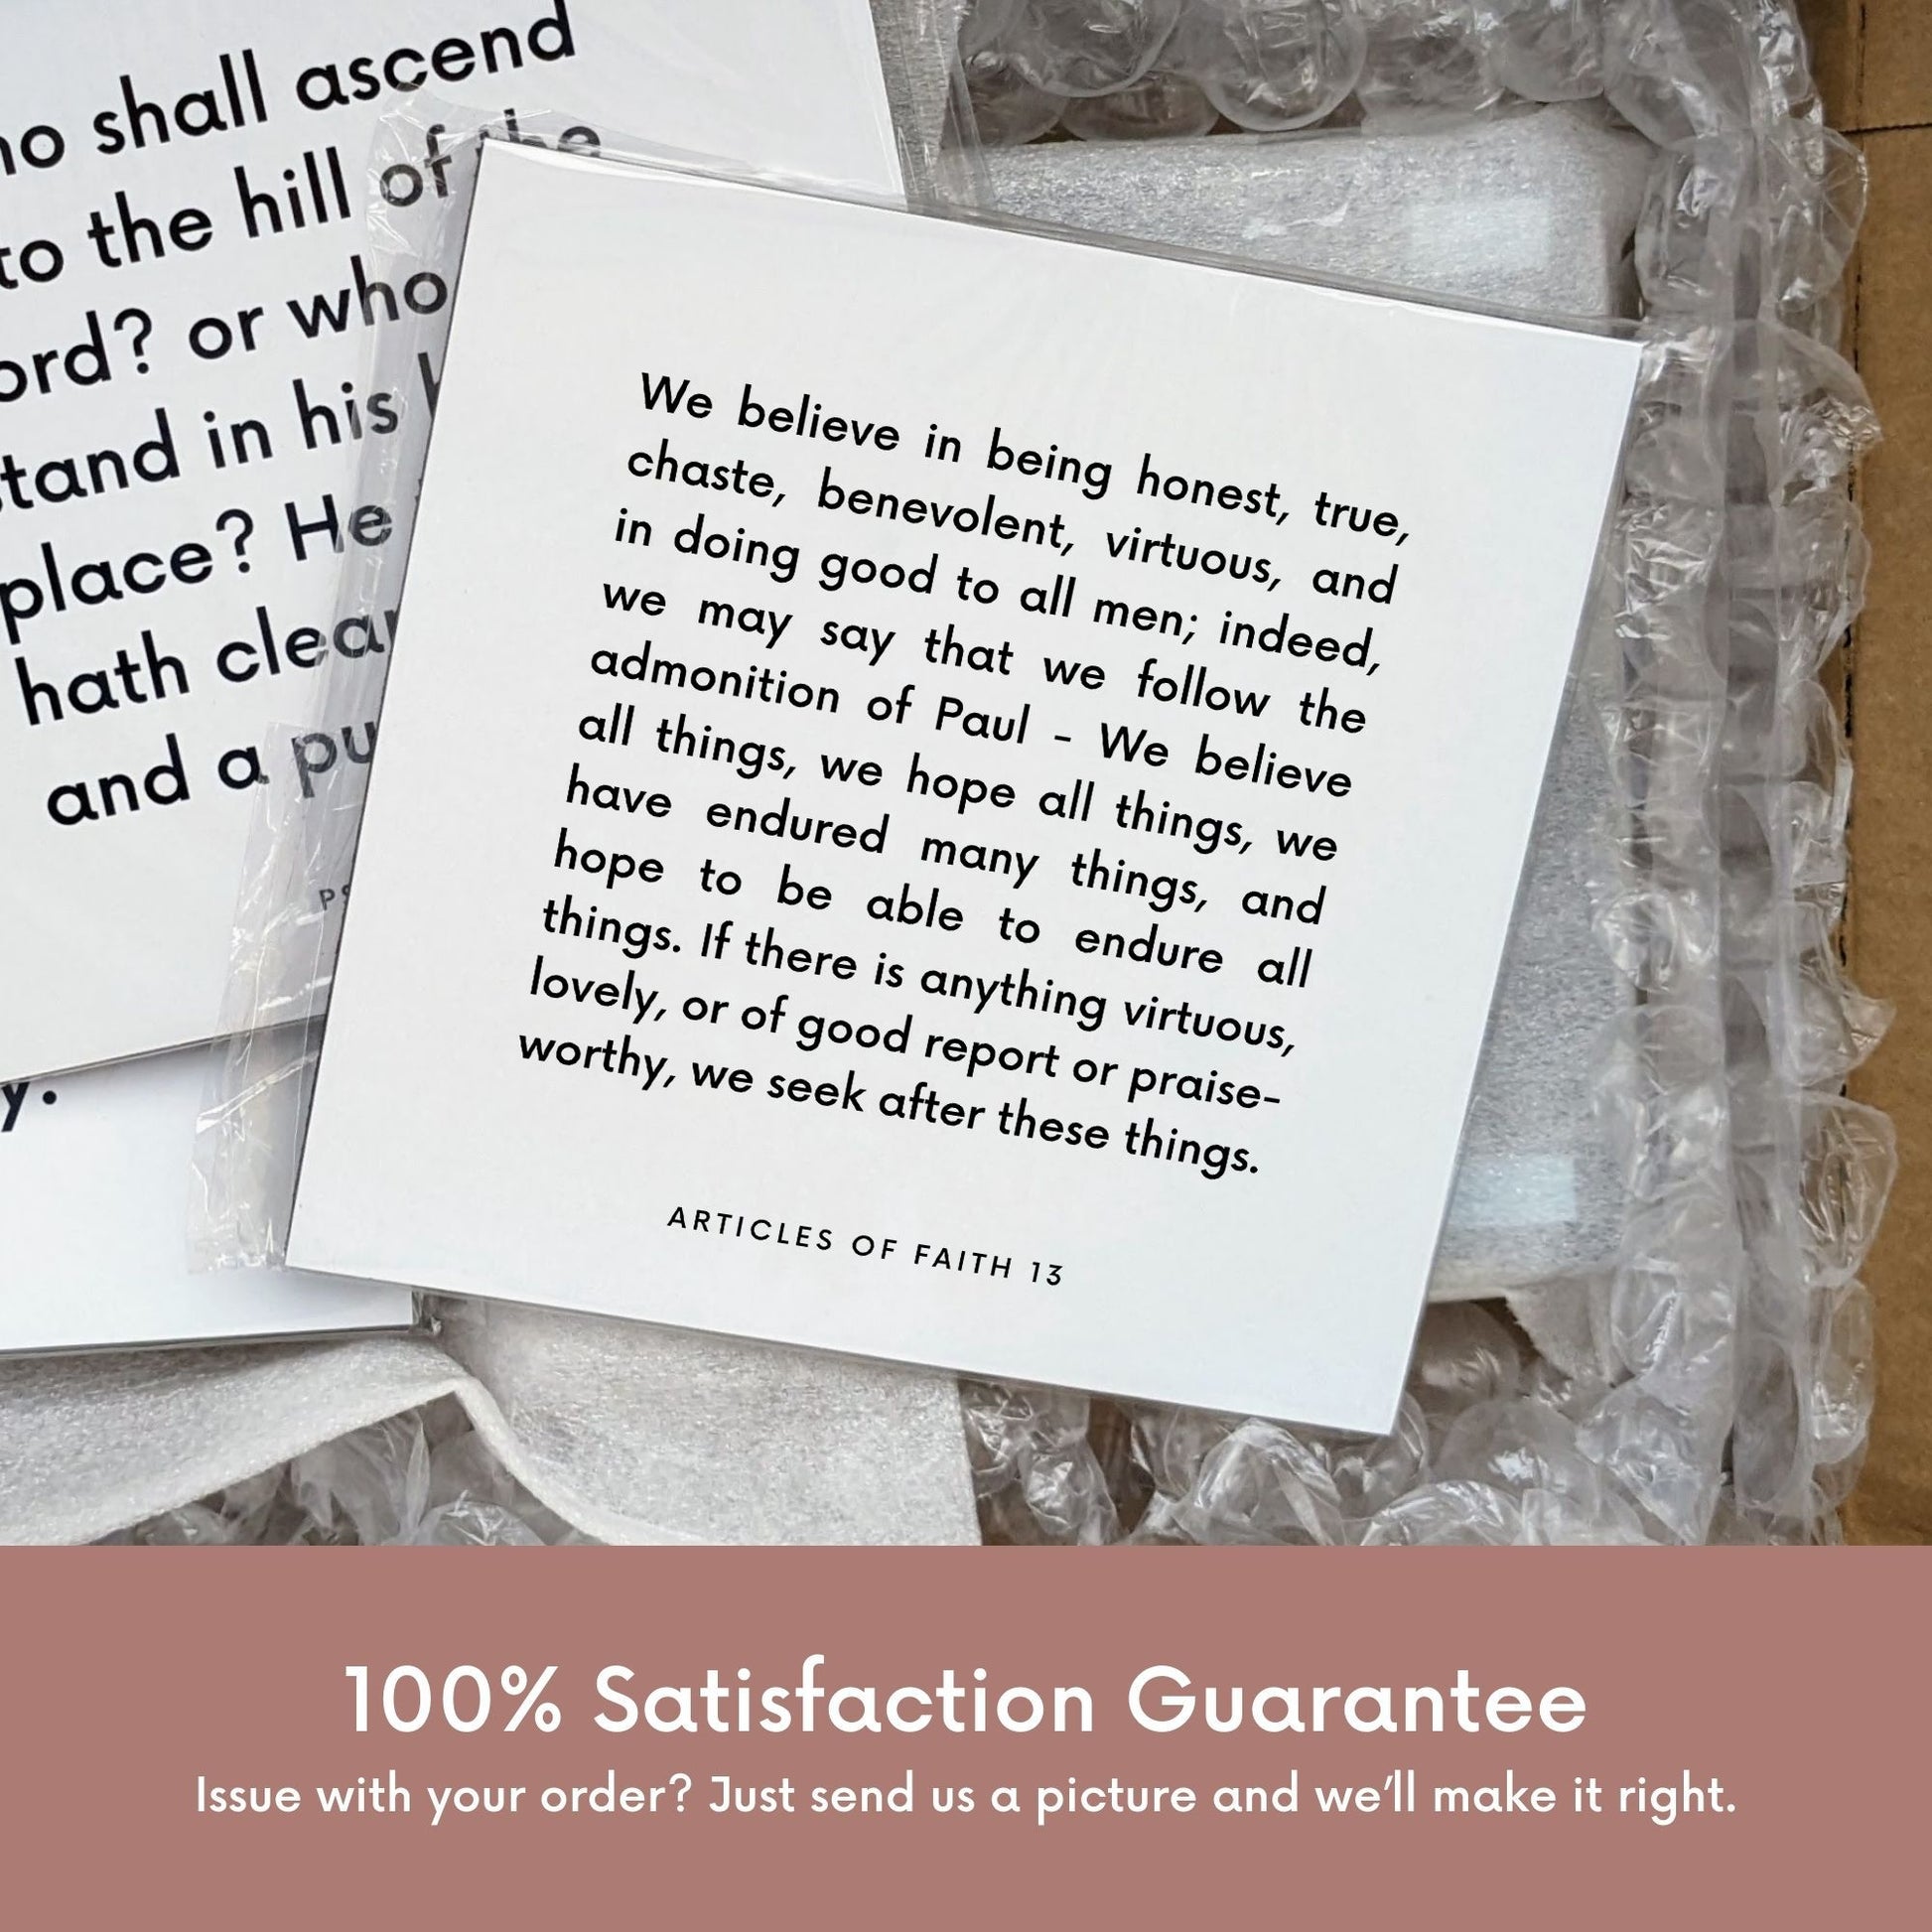 Shipping materials for scripture tile of Articles of Faith 13 - "We believe in being honest, true, chaste, benevolent"